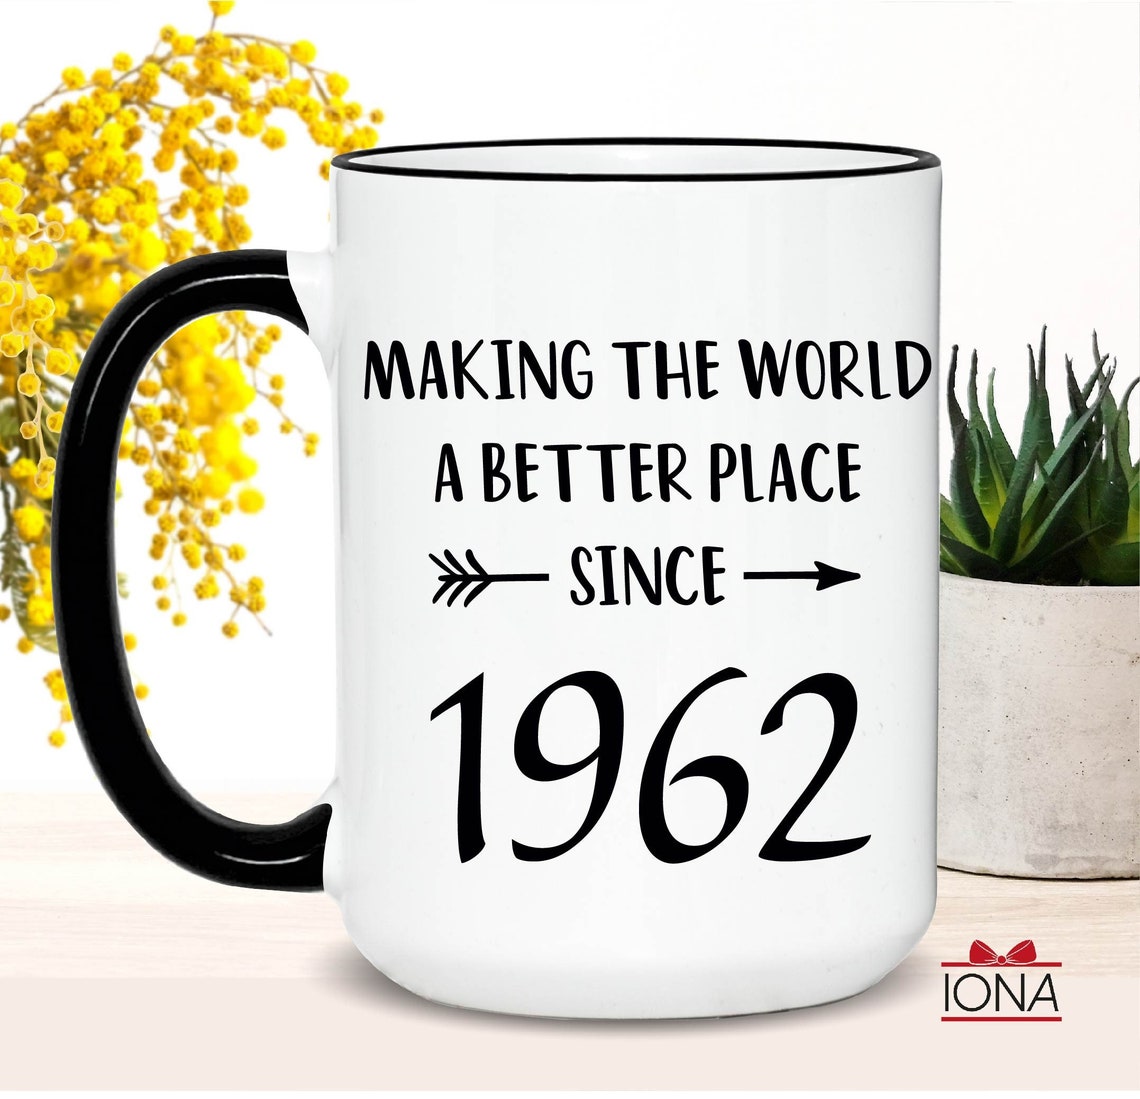 Funny 60 th Birthday Coffee Mug – Making the world a better place since 1962 - Funny Sixtieth Birthday Coffee Mug – Born in 1962 - Best Friends 60th Gifts